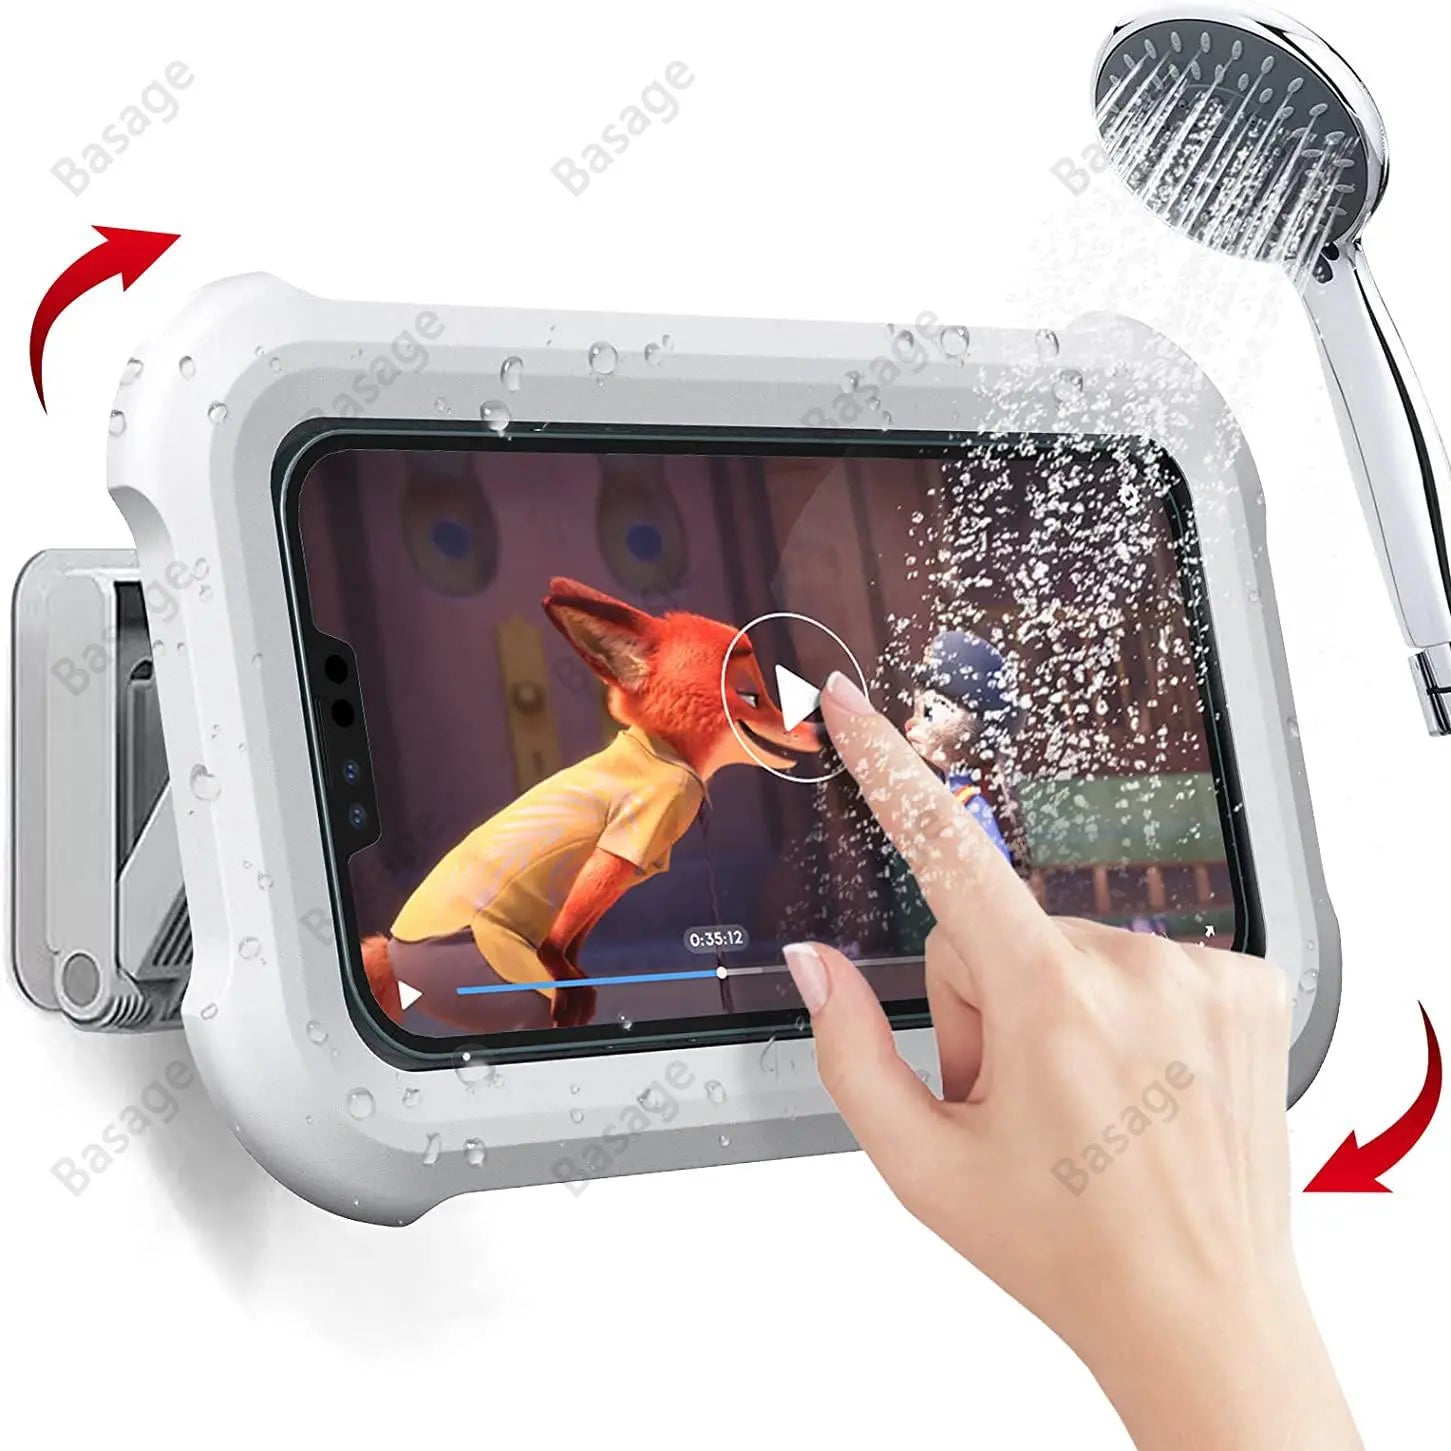 Waterproof Shower Phone Holder with 480 degree Rotation, Angle Adjustable, Wall Mounted Phone Holder || Neoraid